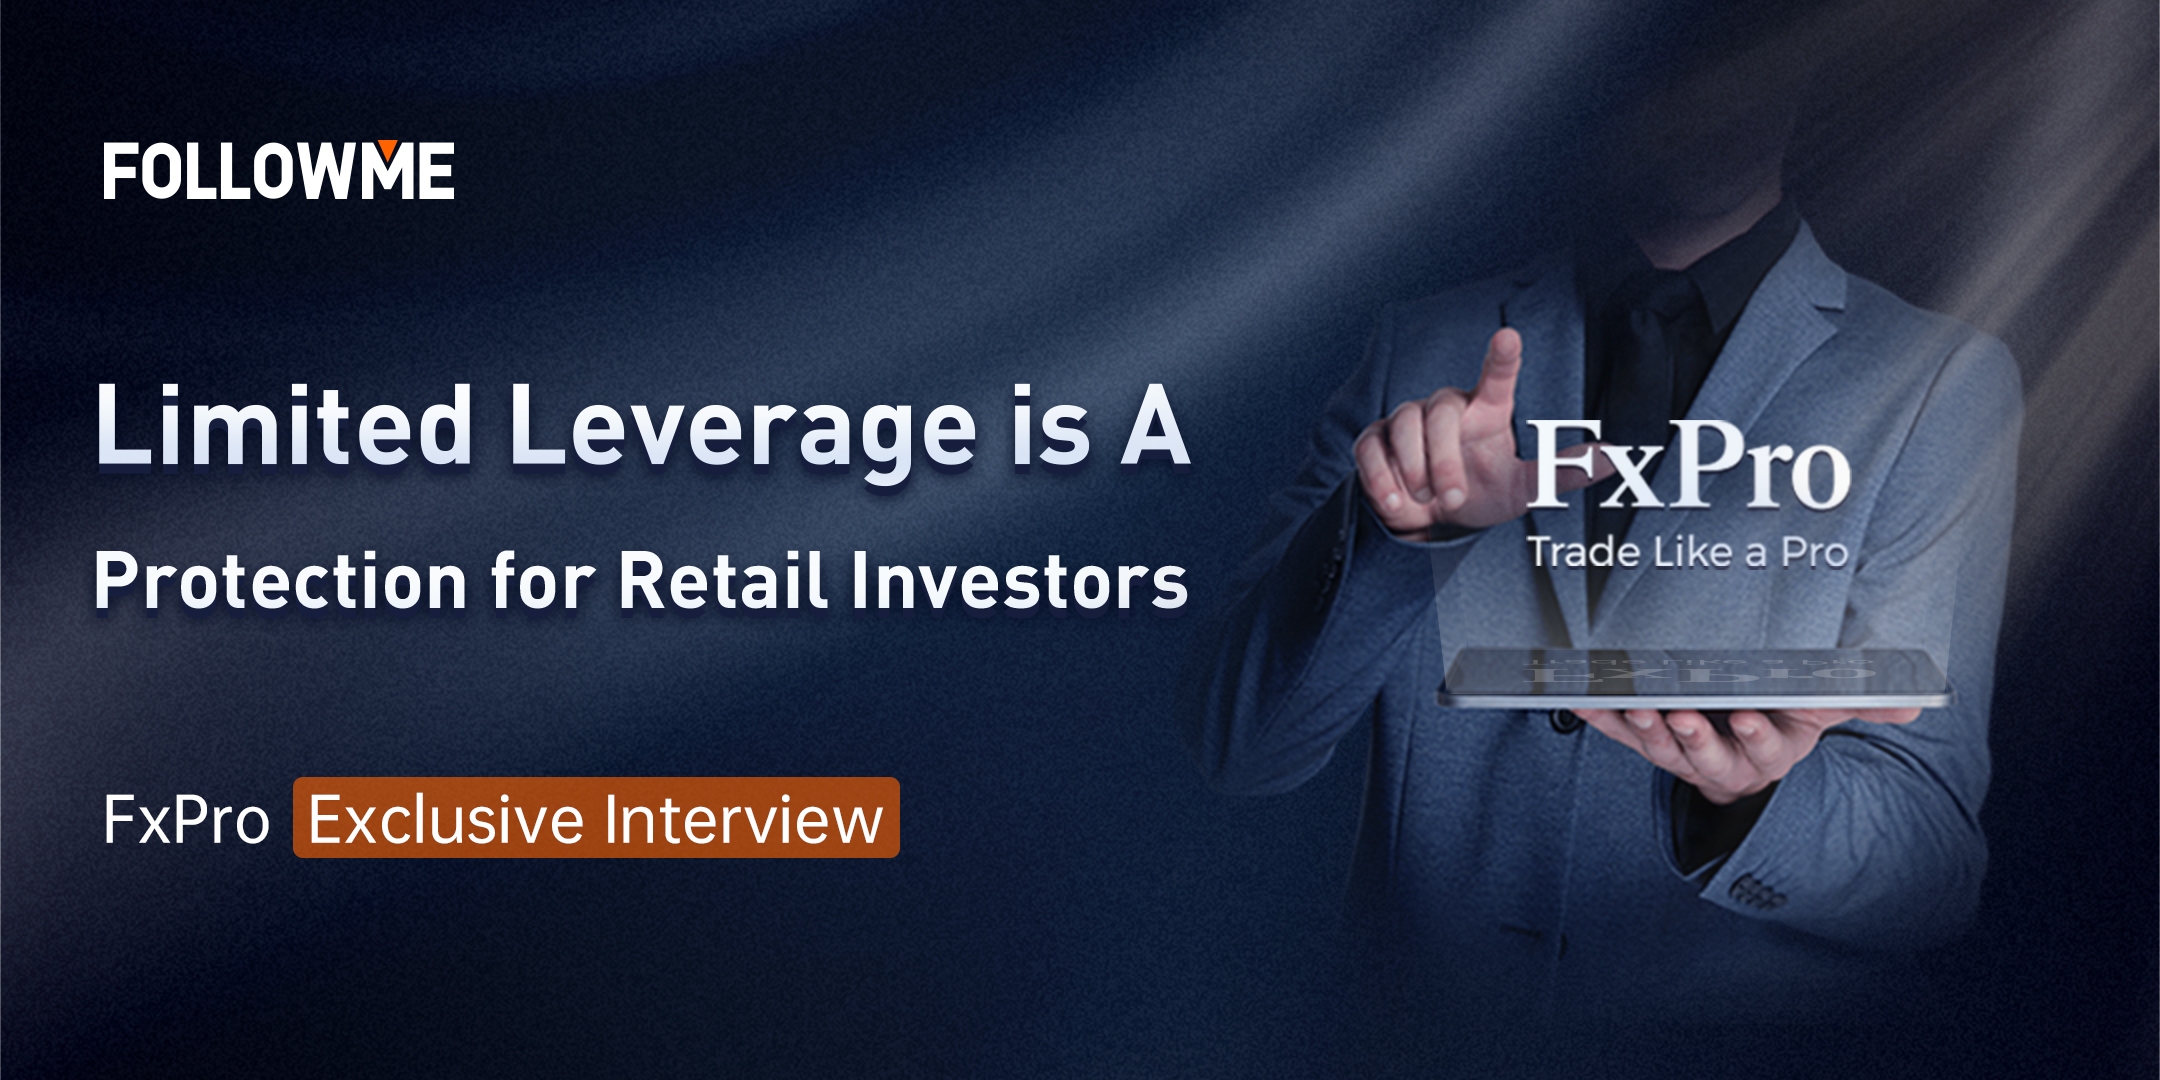 Limited Leverage is a Protection for Retail Investors